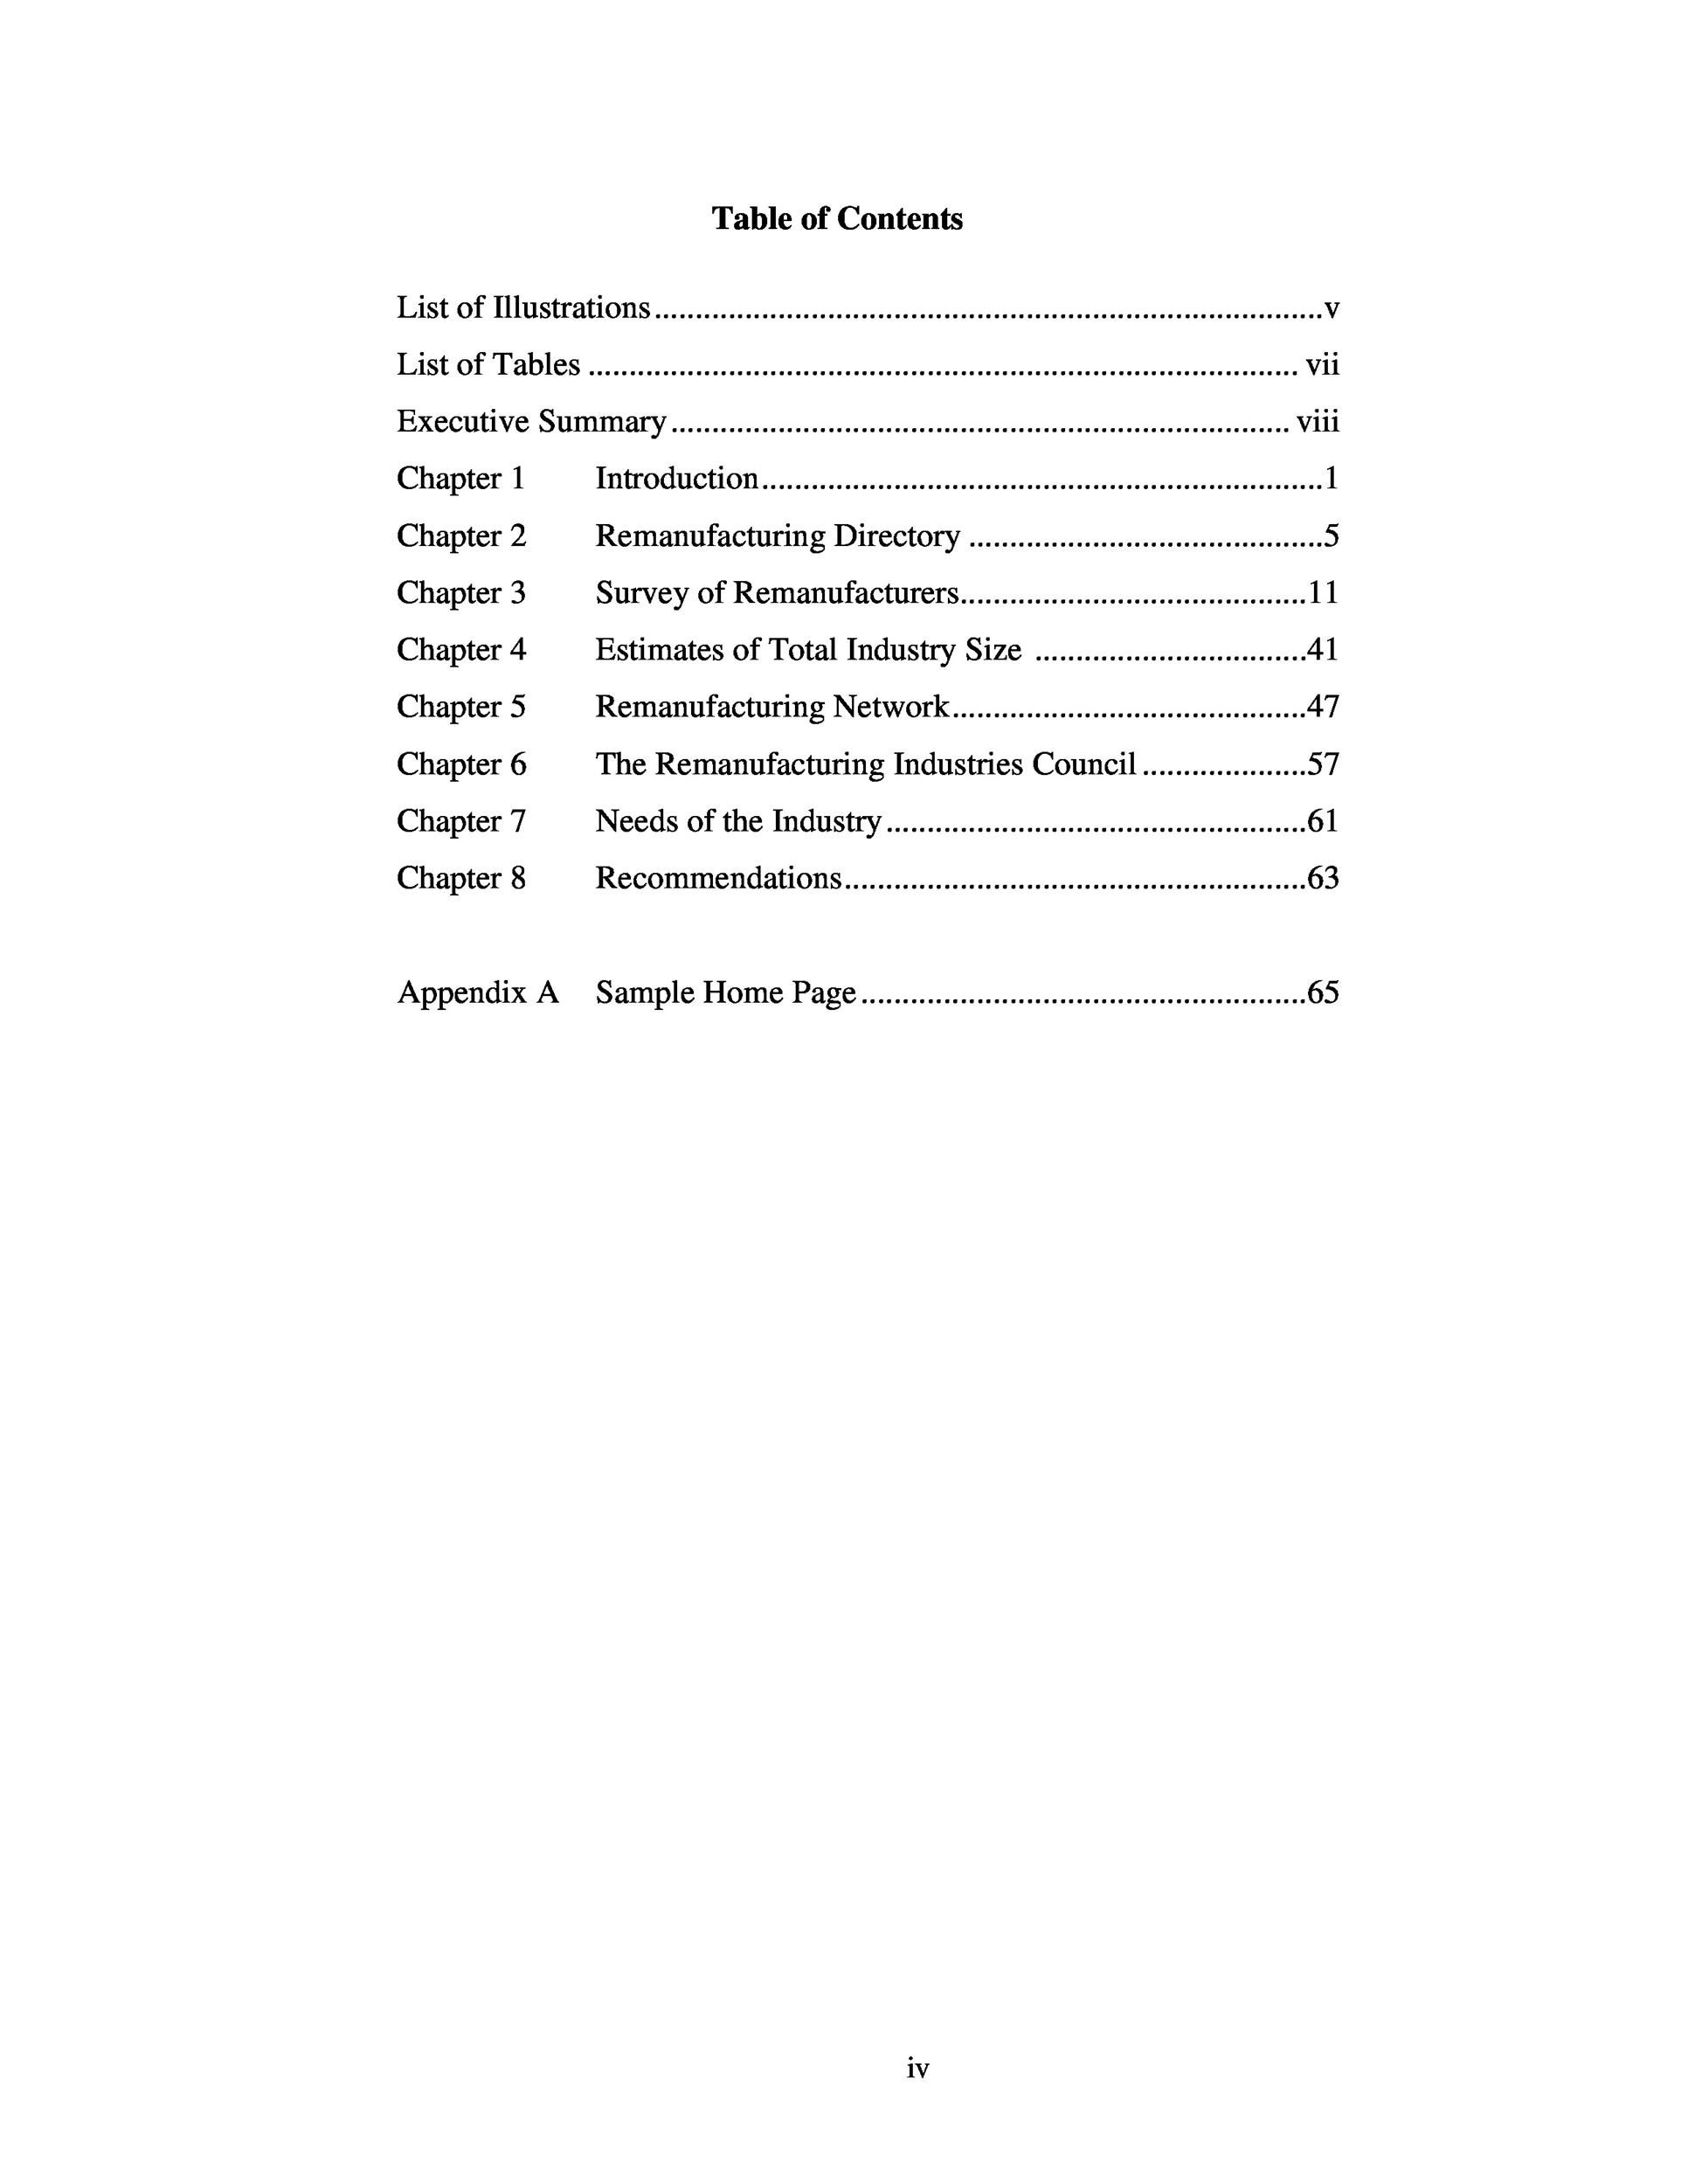 cover letter table of contents